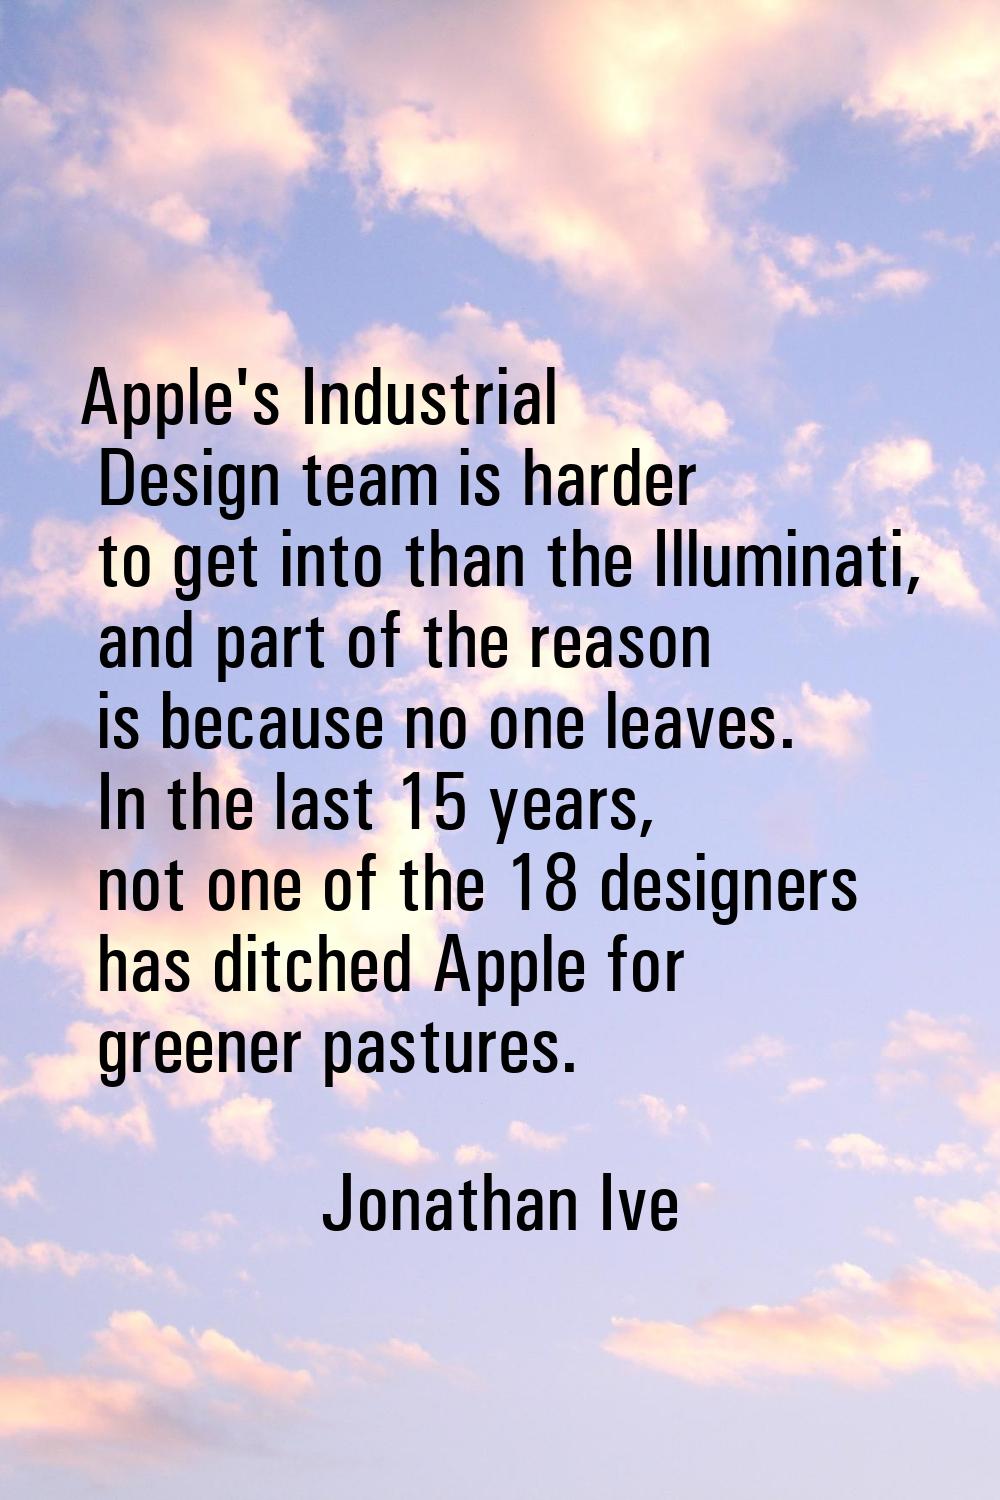 Apple's Industrial Design team is harder to get into than the Illuminati, and part of the reason is